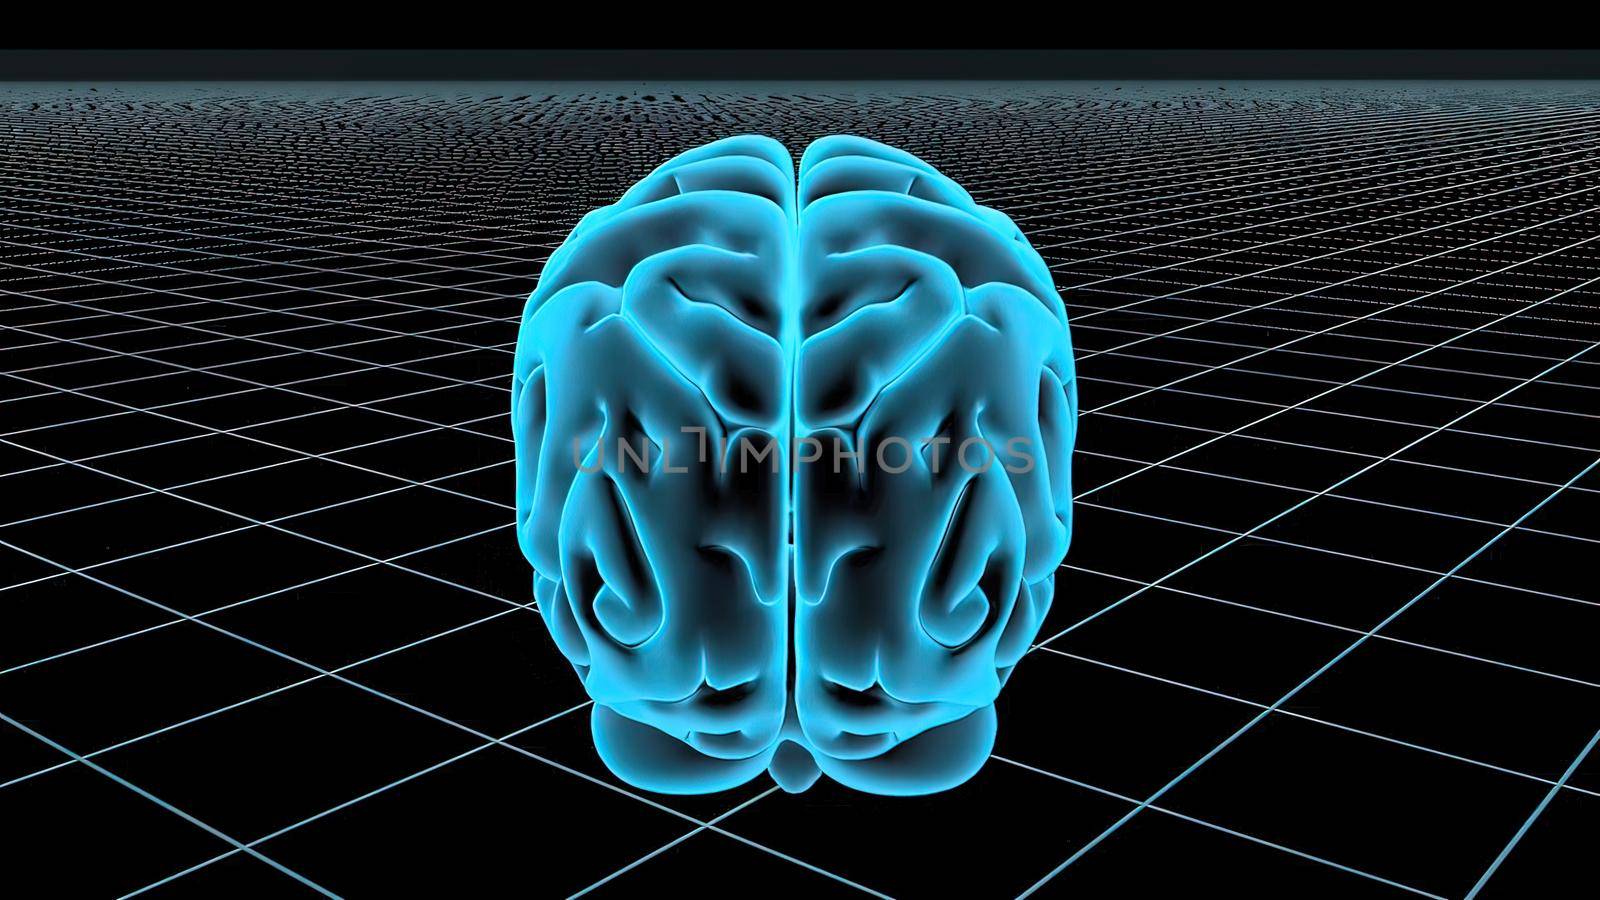 3D Animated Seamless Loop Of A Human Brain by creativepic